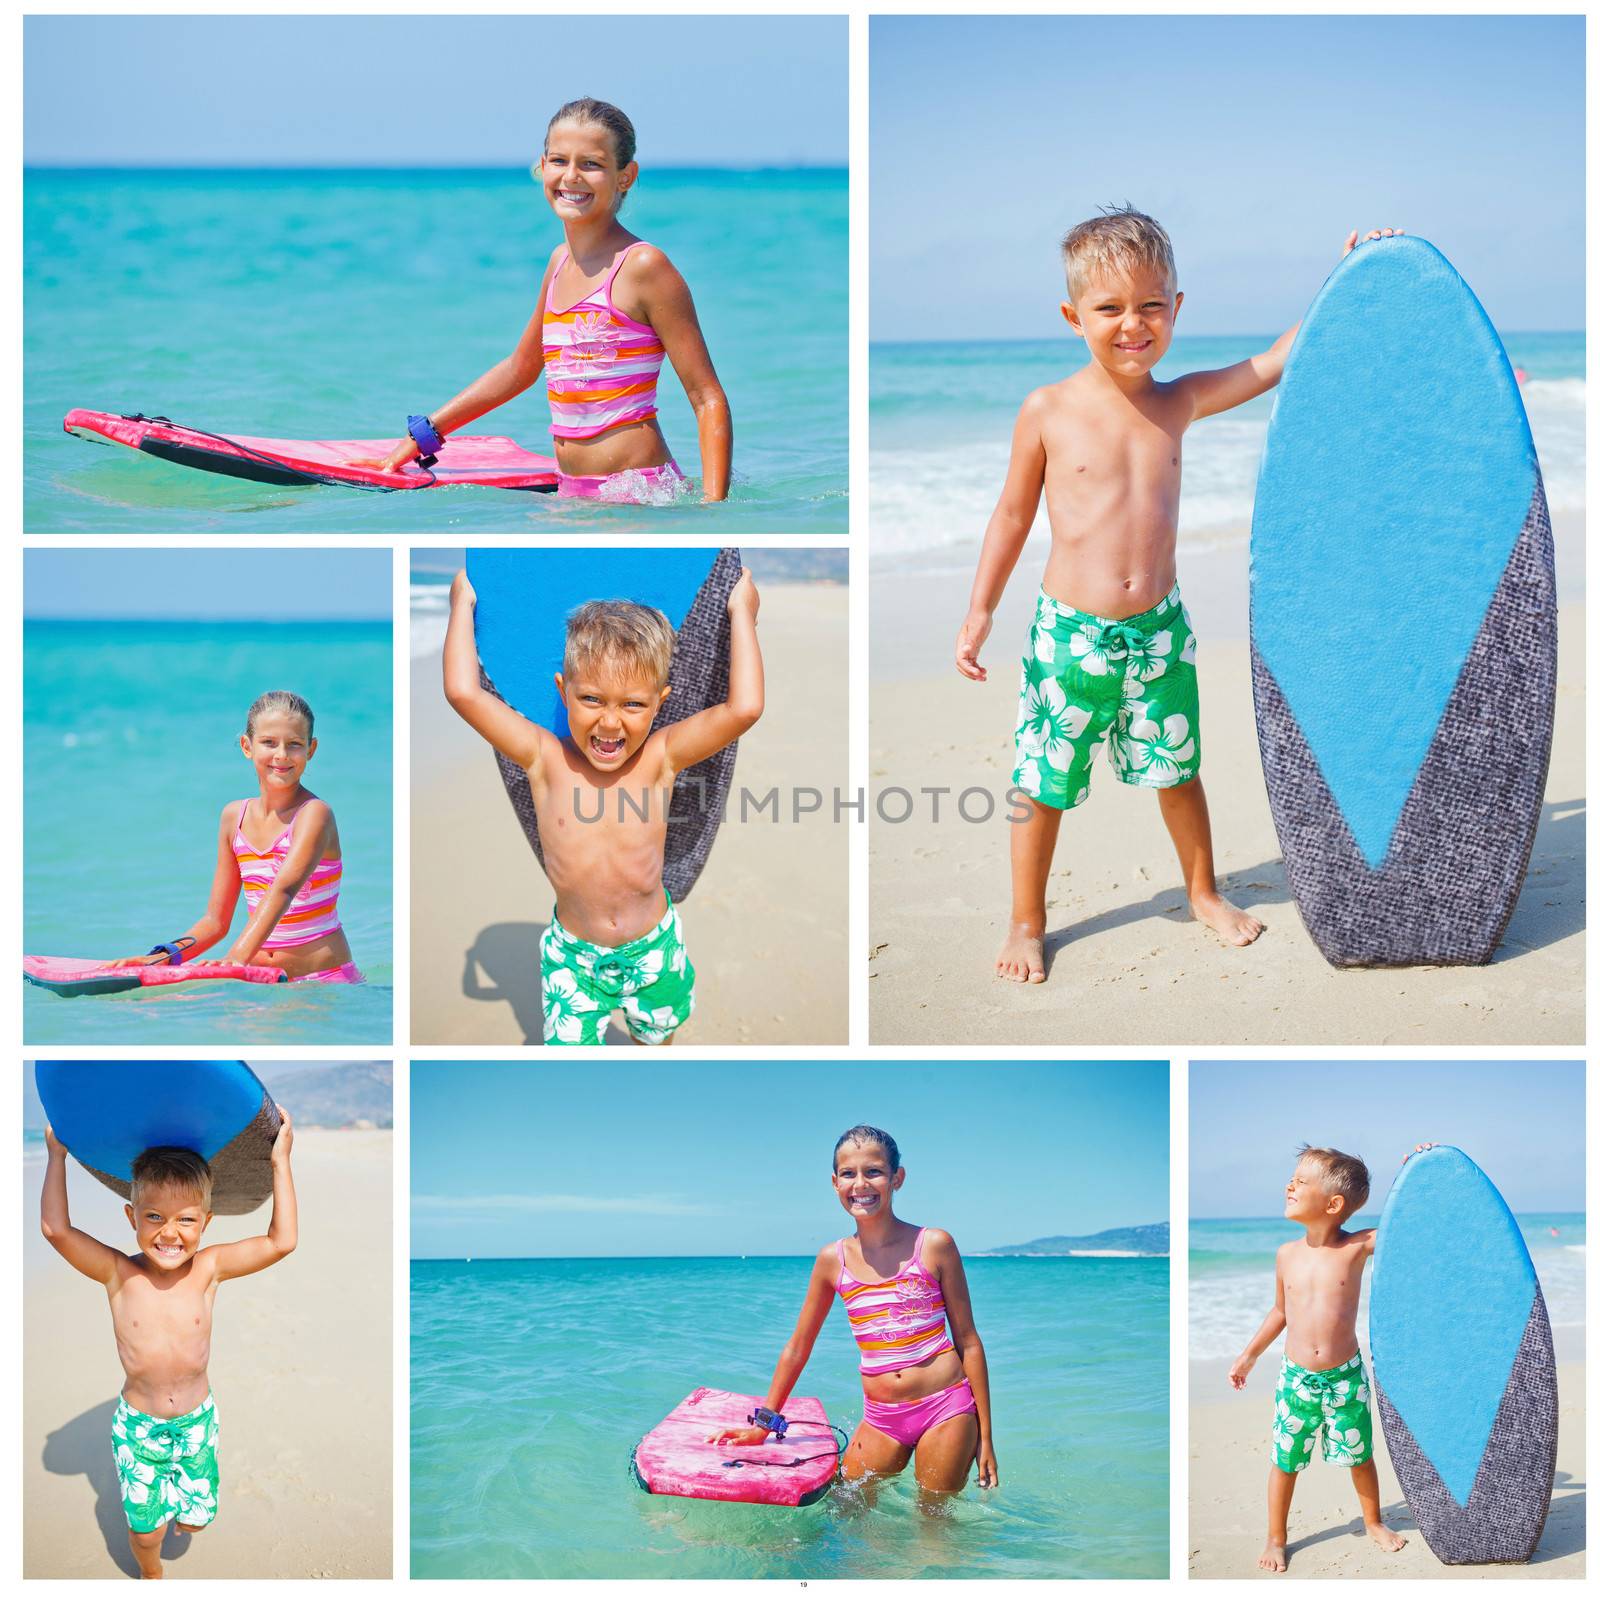 Girl and boy has fun with the surfboard by maxoliki